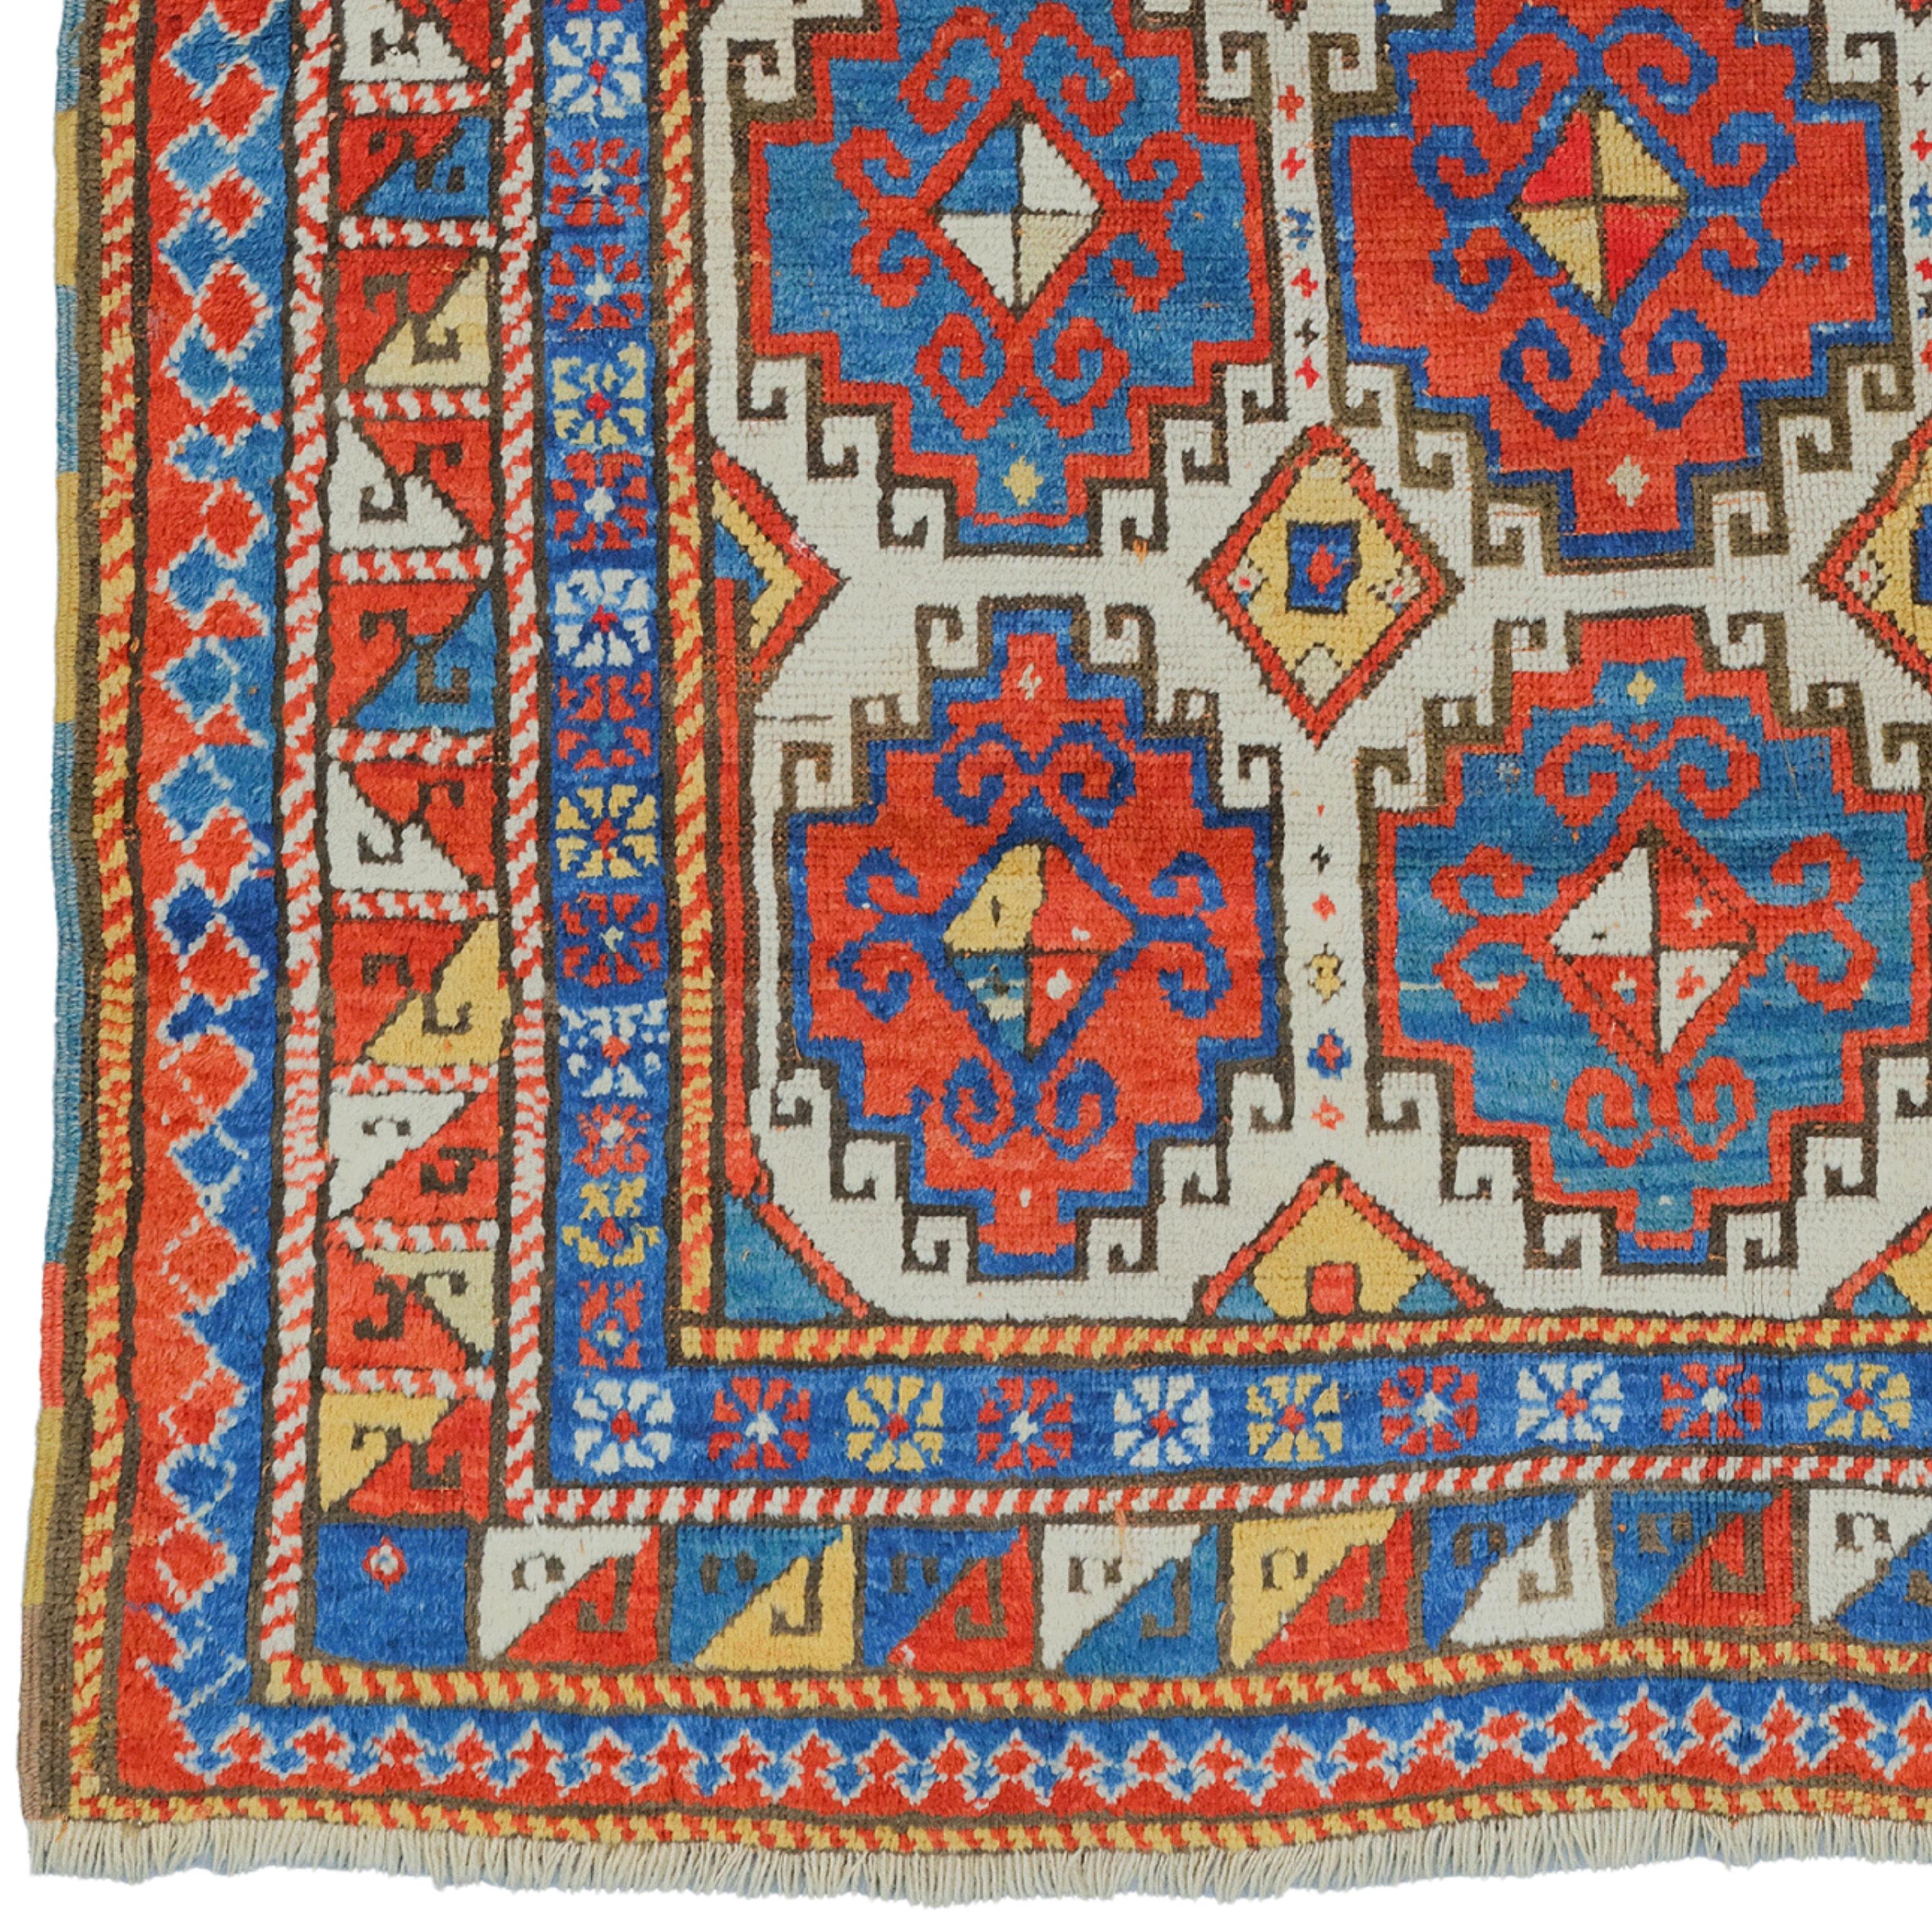 Art Bearing the Traces of Time: Mid-19th Century Antique Caucasian Moghan Carpet

This antique Caucasian Moghan carpet is a unique work of art from the mid-19th century. With its rich color palette and striking geometric patterns, this carpet adds a